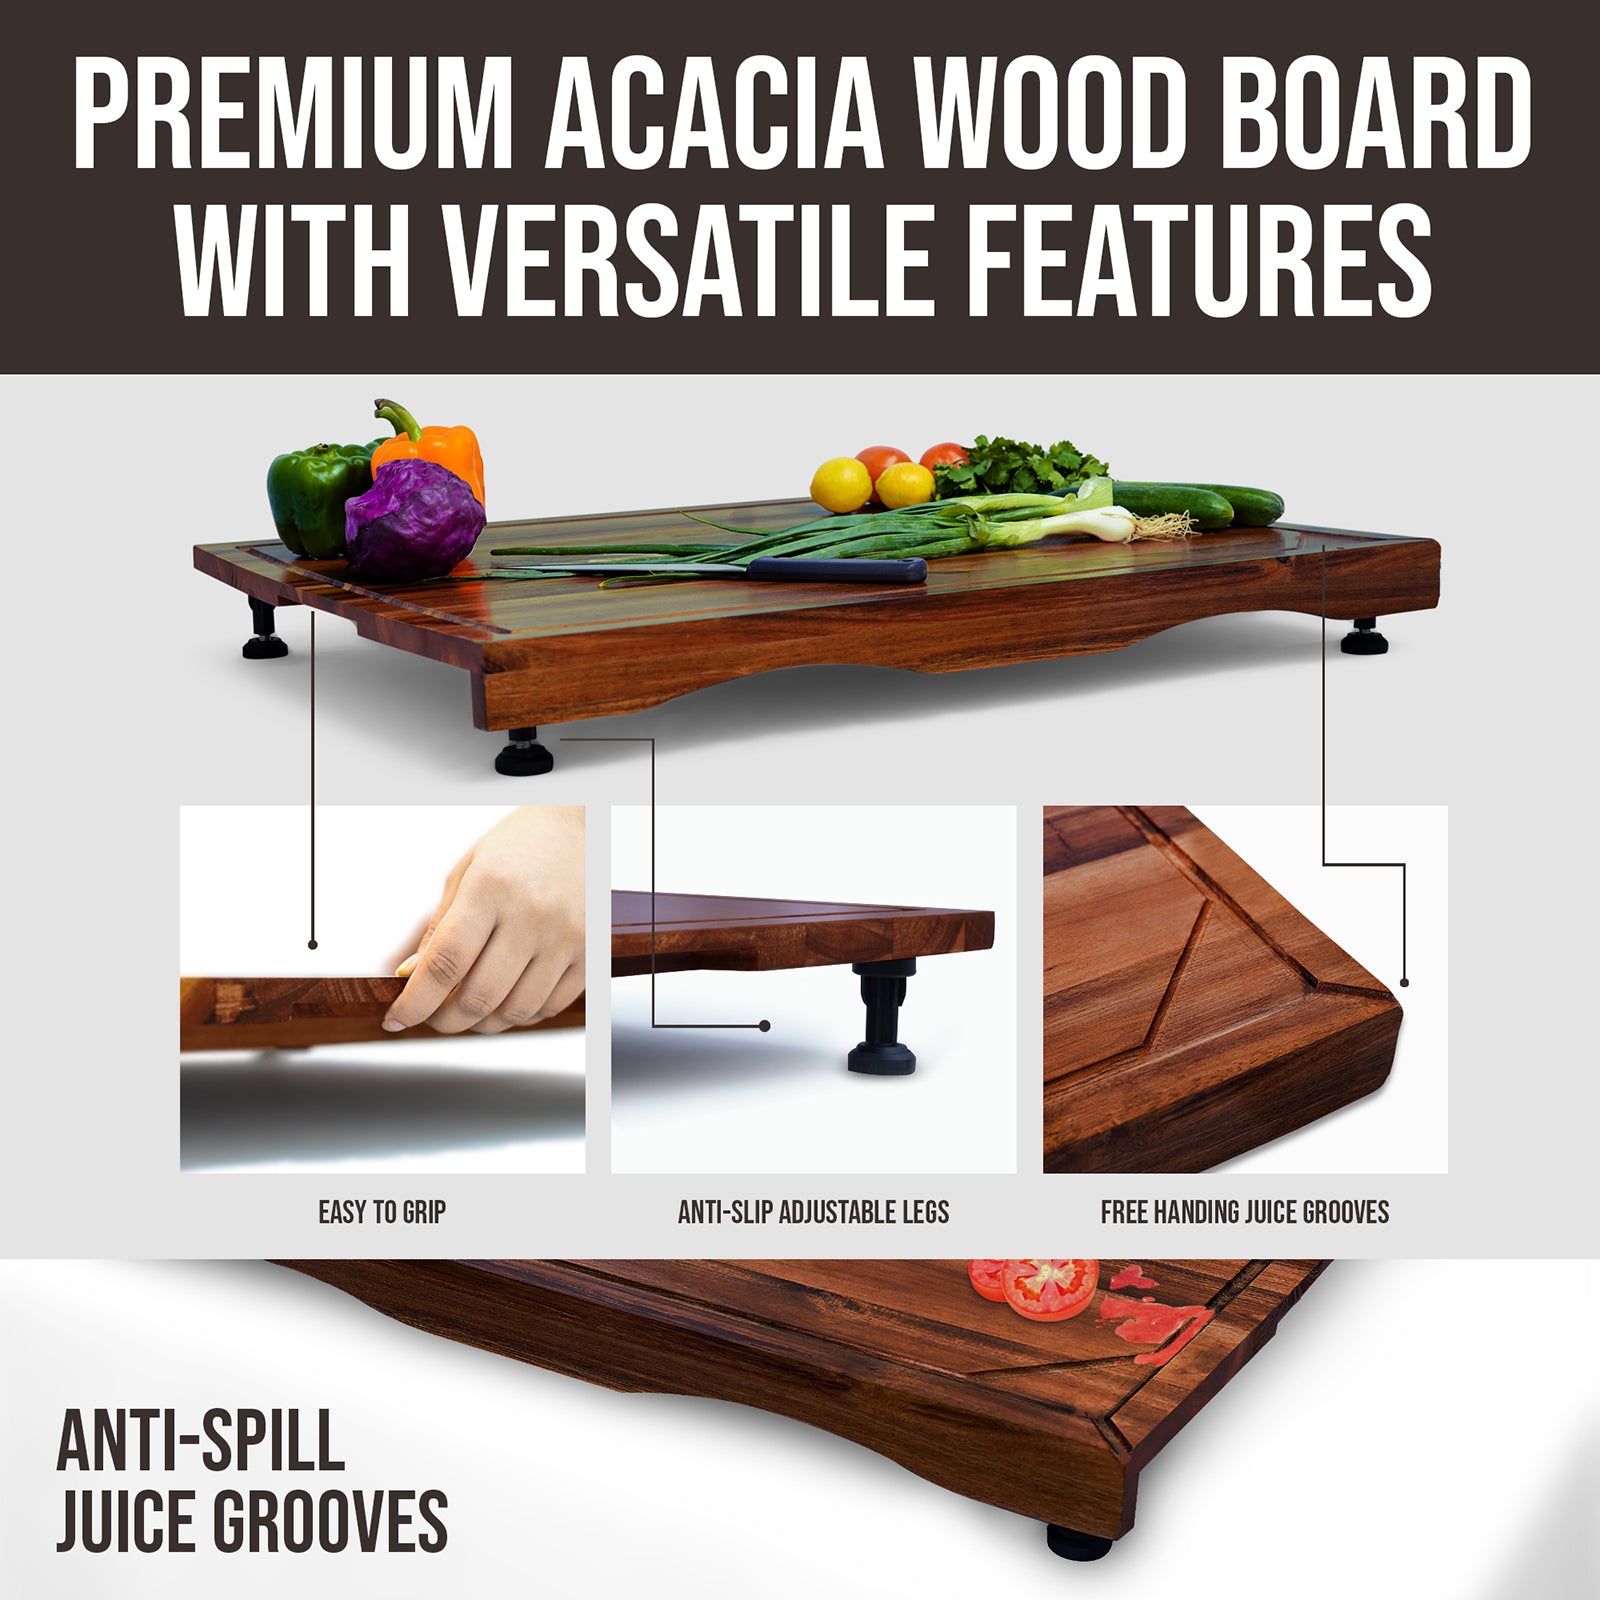 Noodle Board Stove Cover-Acacia Wood Stove Top Covers for Electric Stove  and Gas Stove-Wooden Stovetop Cover for Counter Space-Stove Burner